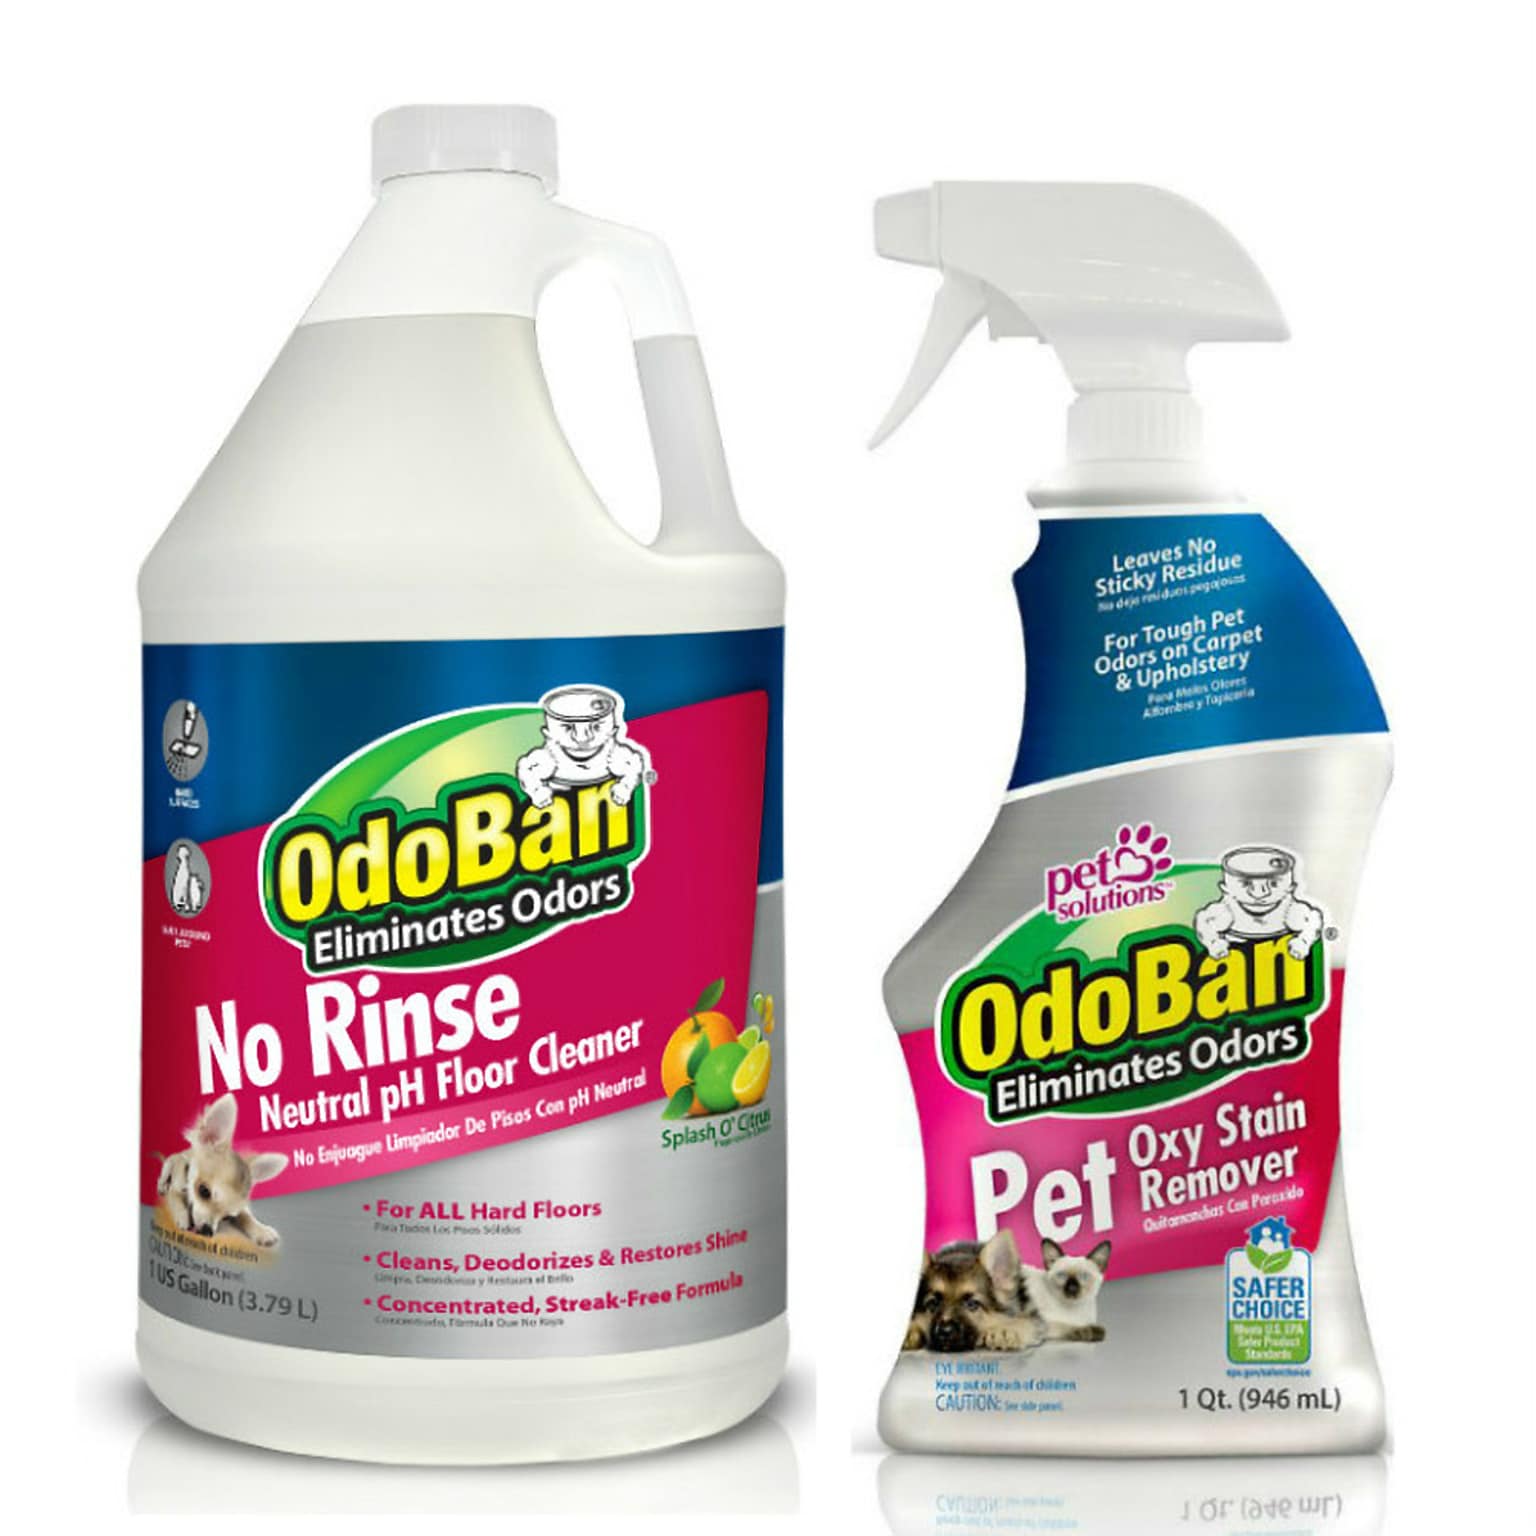 OdoBan Pet Solutions 32 oz. Spray Oxy Stain Remover and 1 Gallon No Rinse Neutral pH Floor Cleaner (OBPTG-STP)